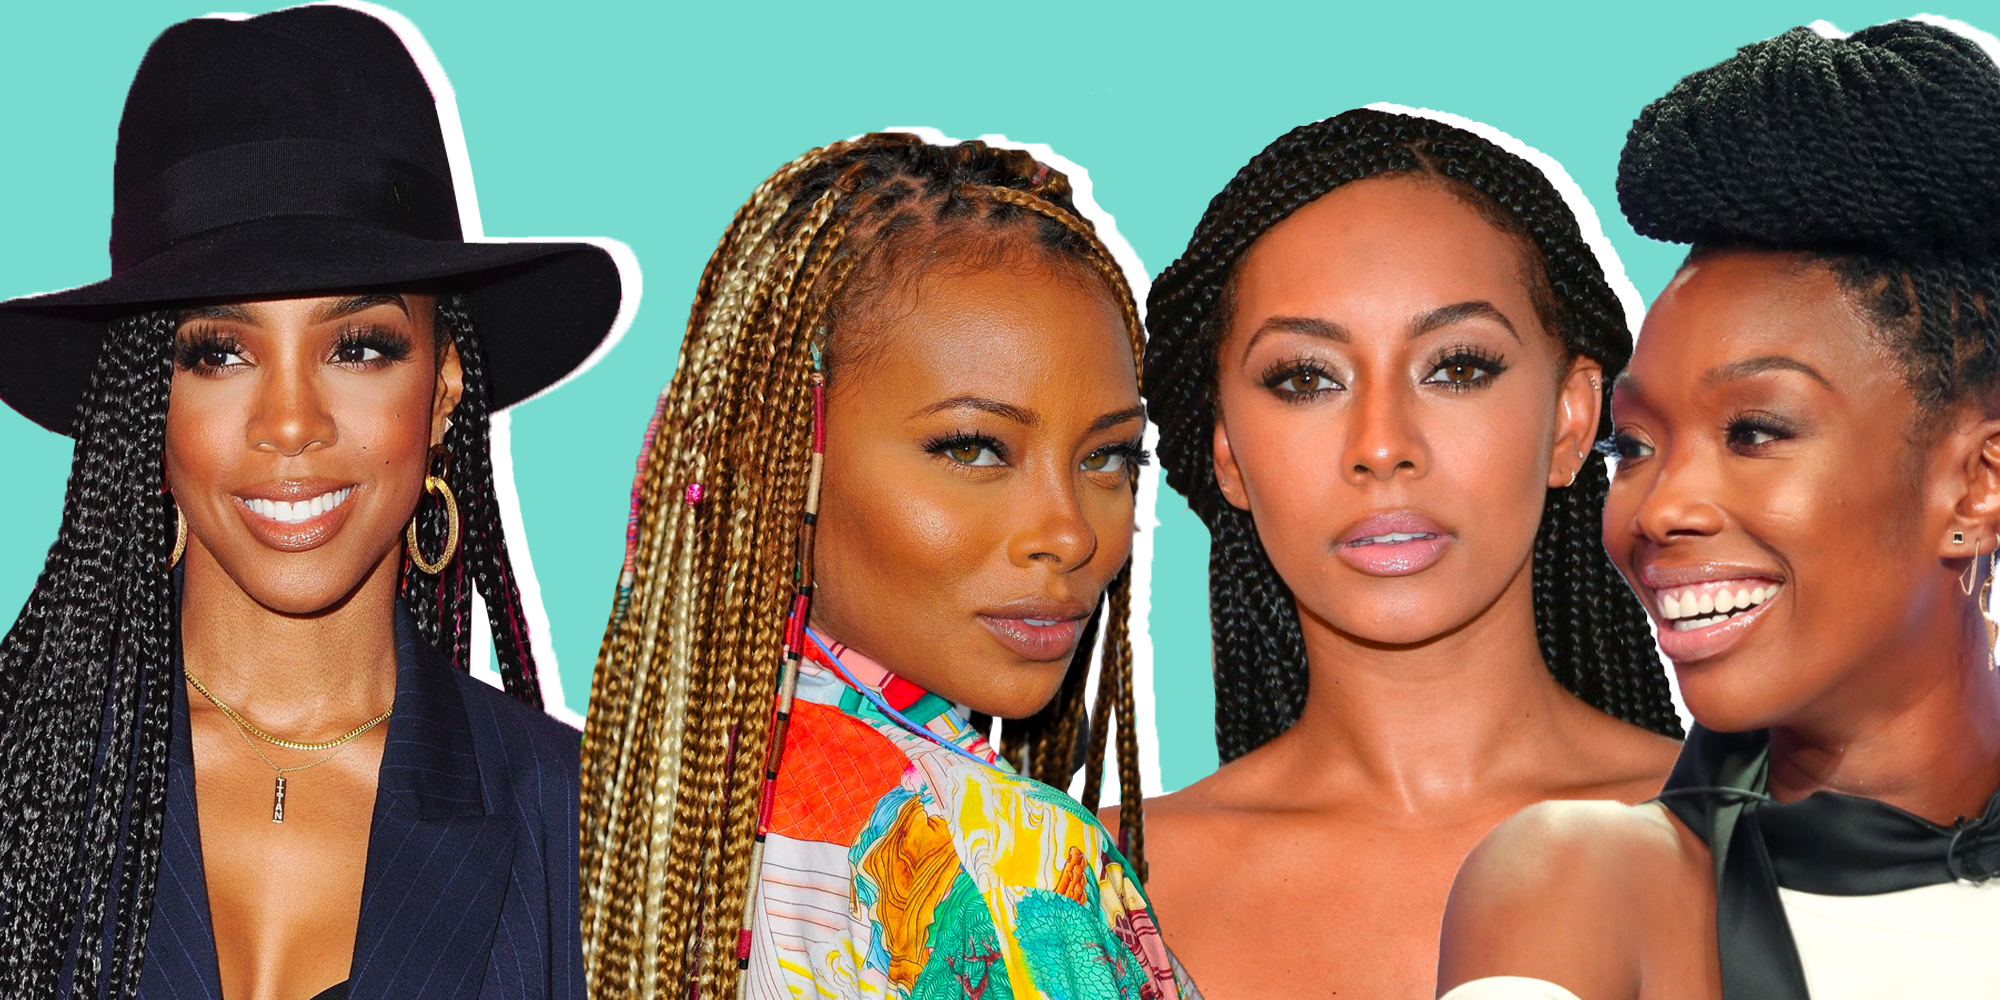 10 Cool Ways to Wear Long Box Braids With Color